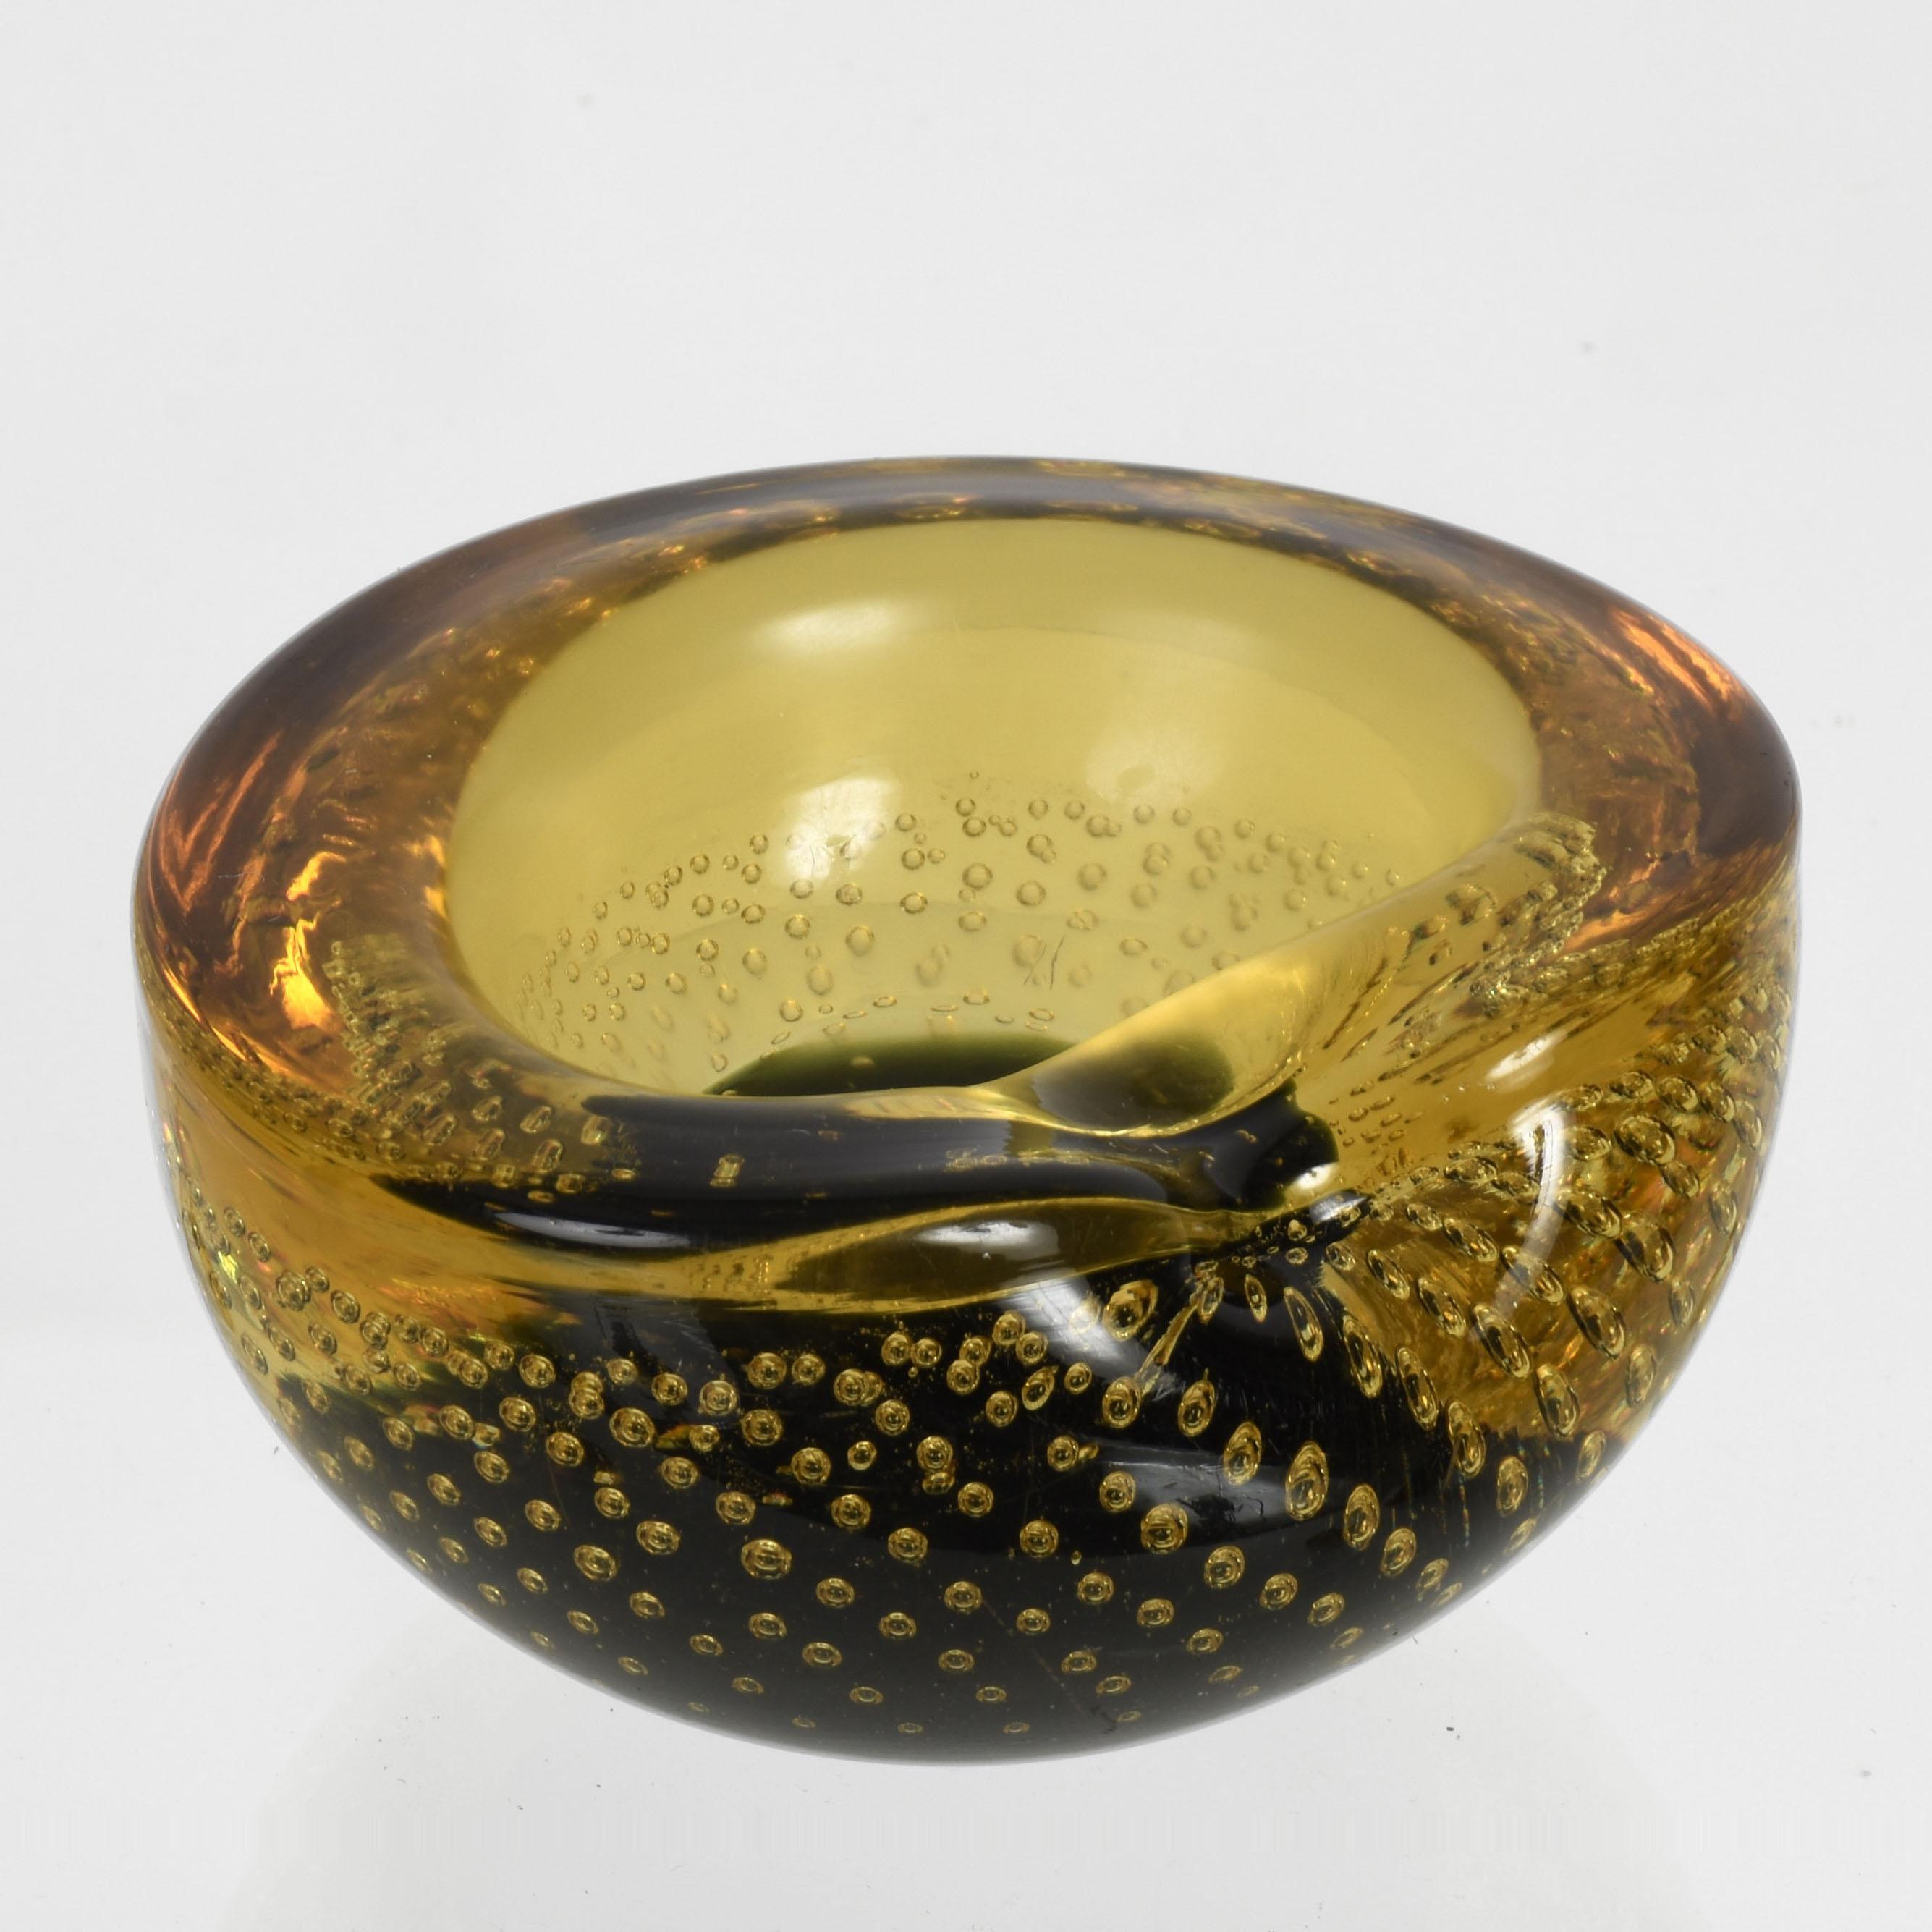 Spectacular midcentury decorative bowl in amber, yellow and blue Murano glass with air bubbles (bullicante). This wonderful piece was produced in Italy during the 1960s and it is attributed to Galliano Ferro.

This piece is unique for the elegant